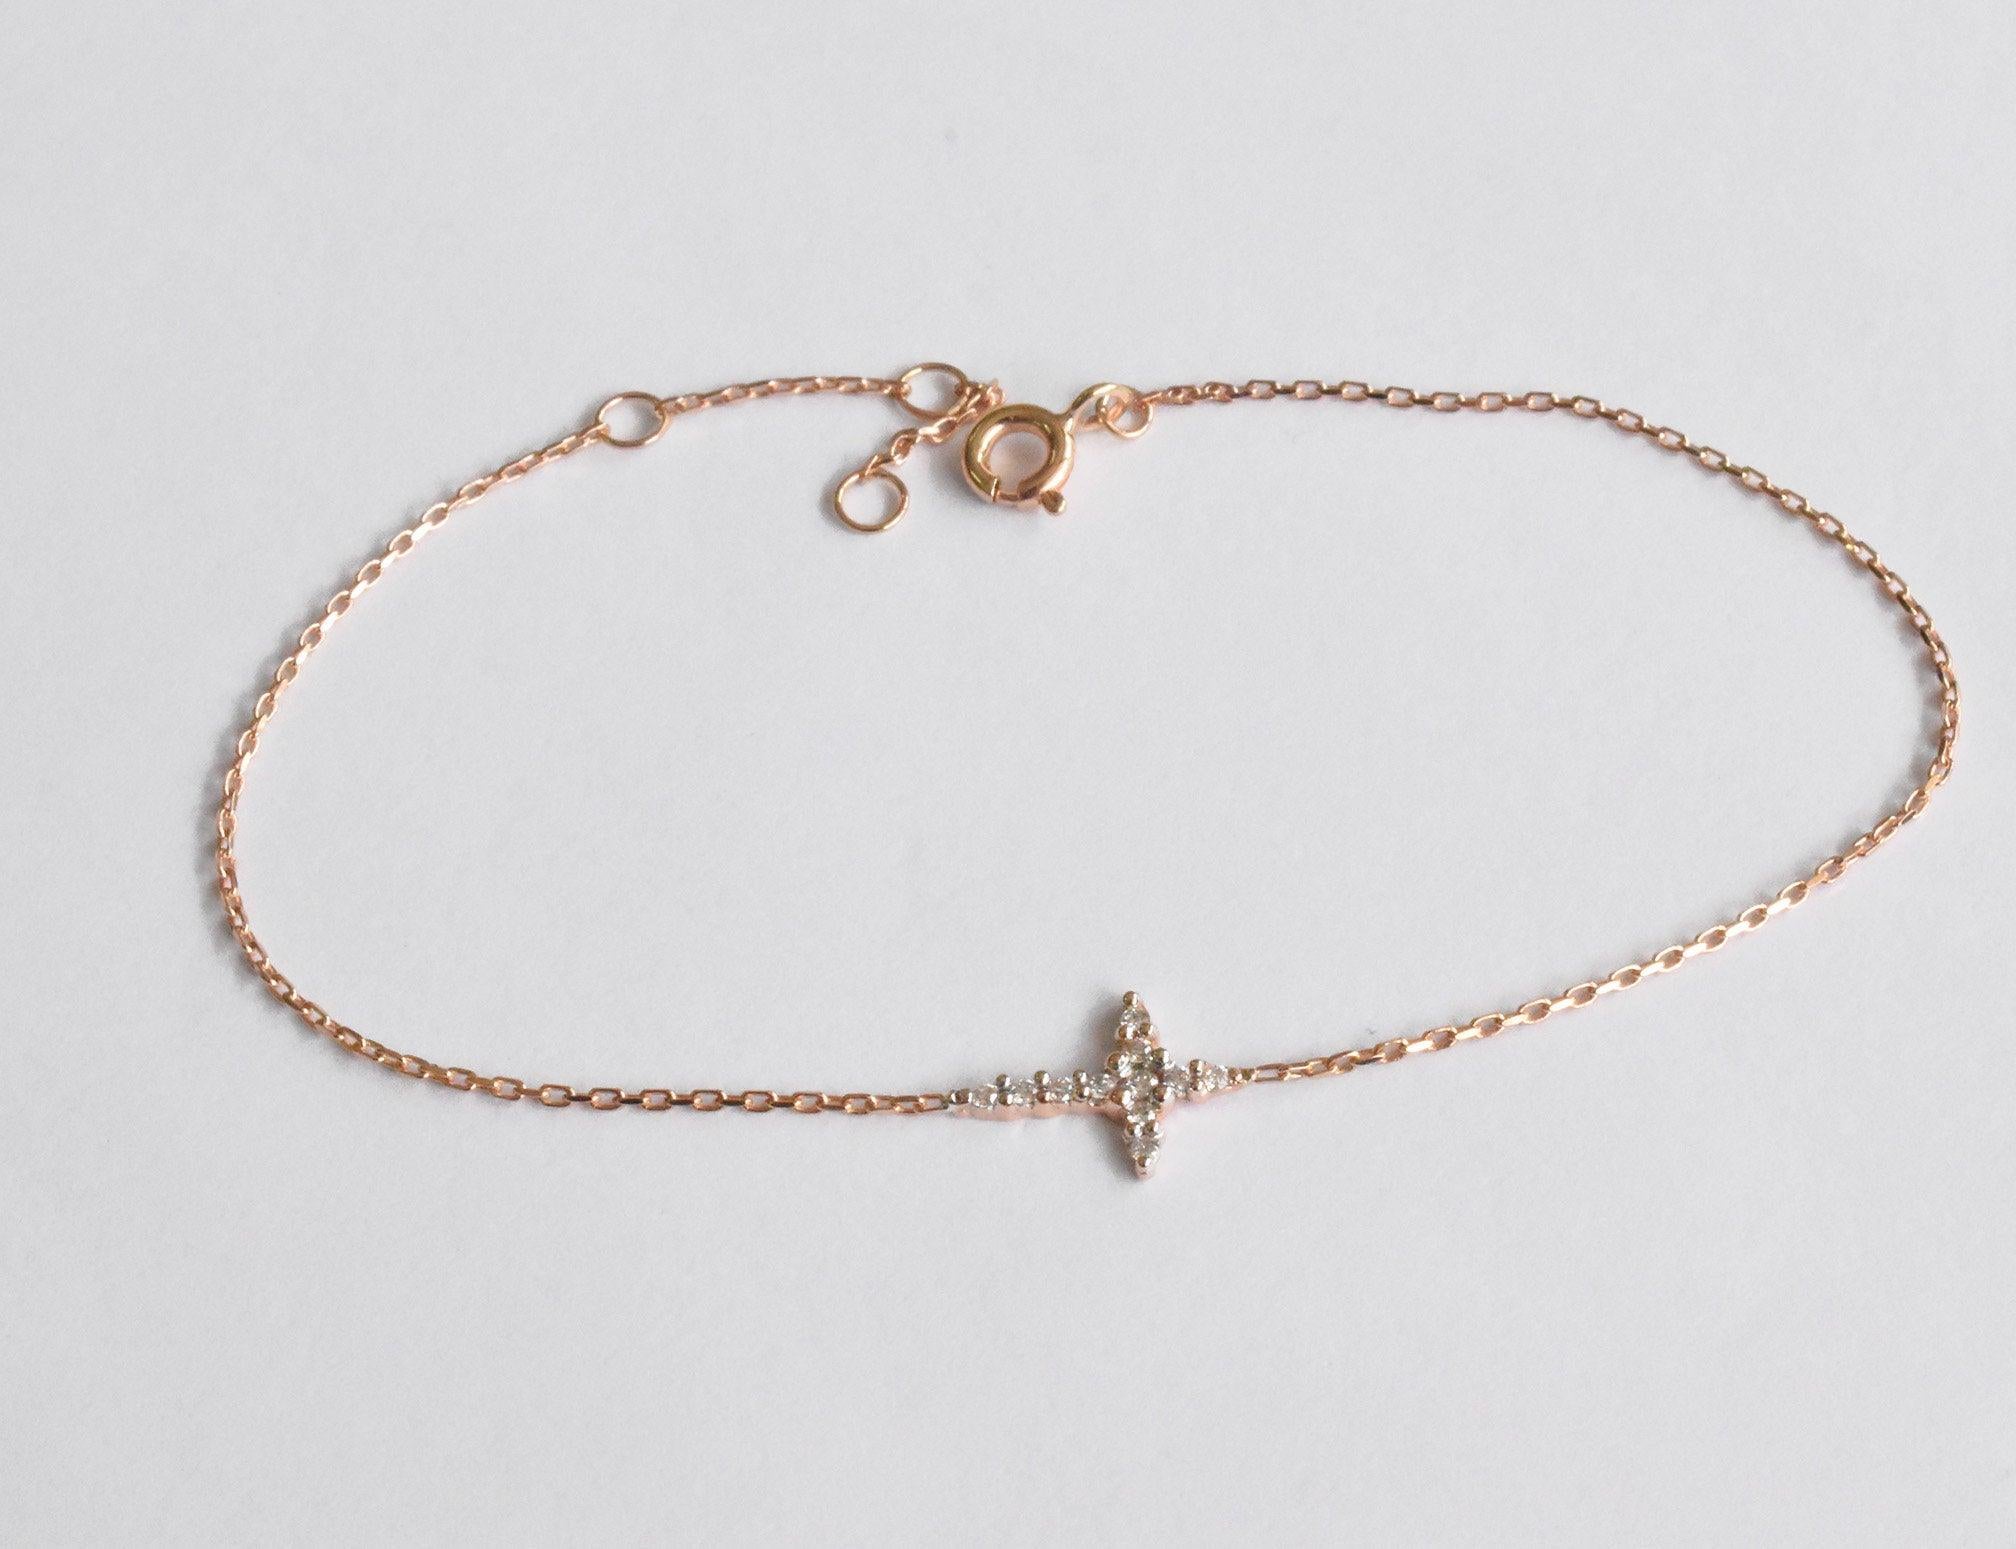 Dainty Cross Bracelet is made of 18k solid gold.
Available in three colors of gold: White Gold / Rose Gold / Yellow Gold.

Natural genuine round cut diamond each diamond is hand selected by me to ensure quality and set by a master setter in our